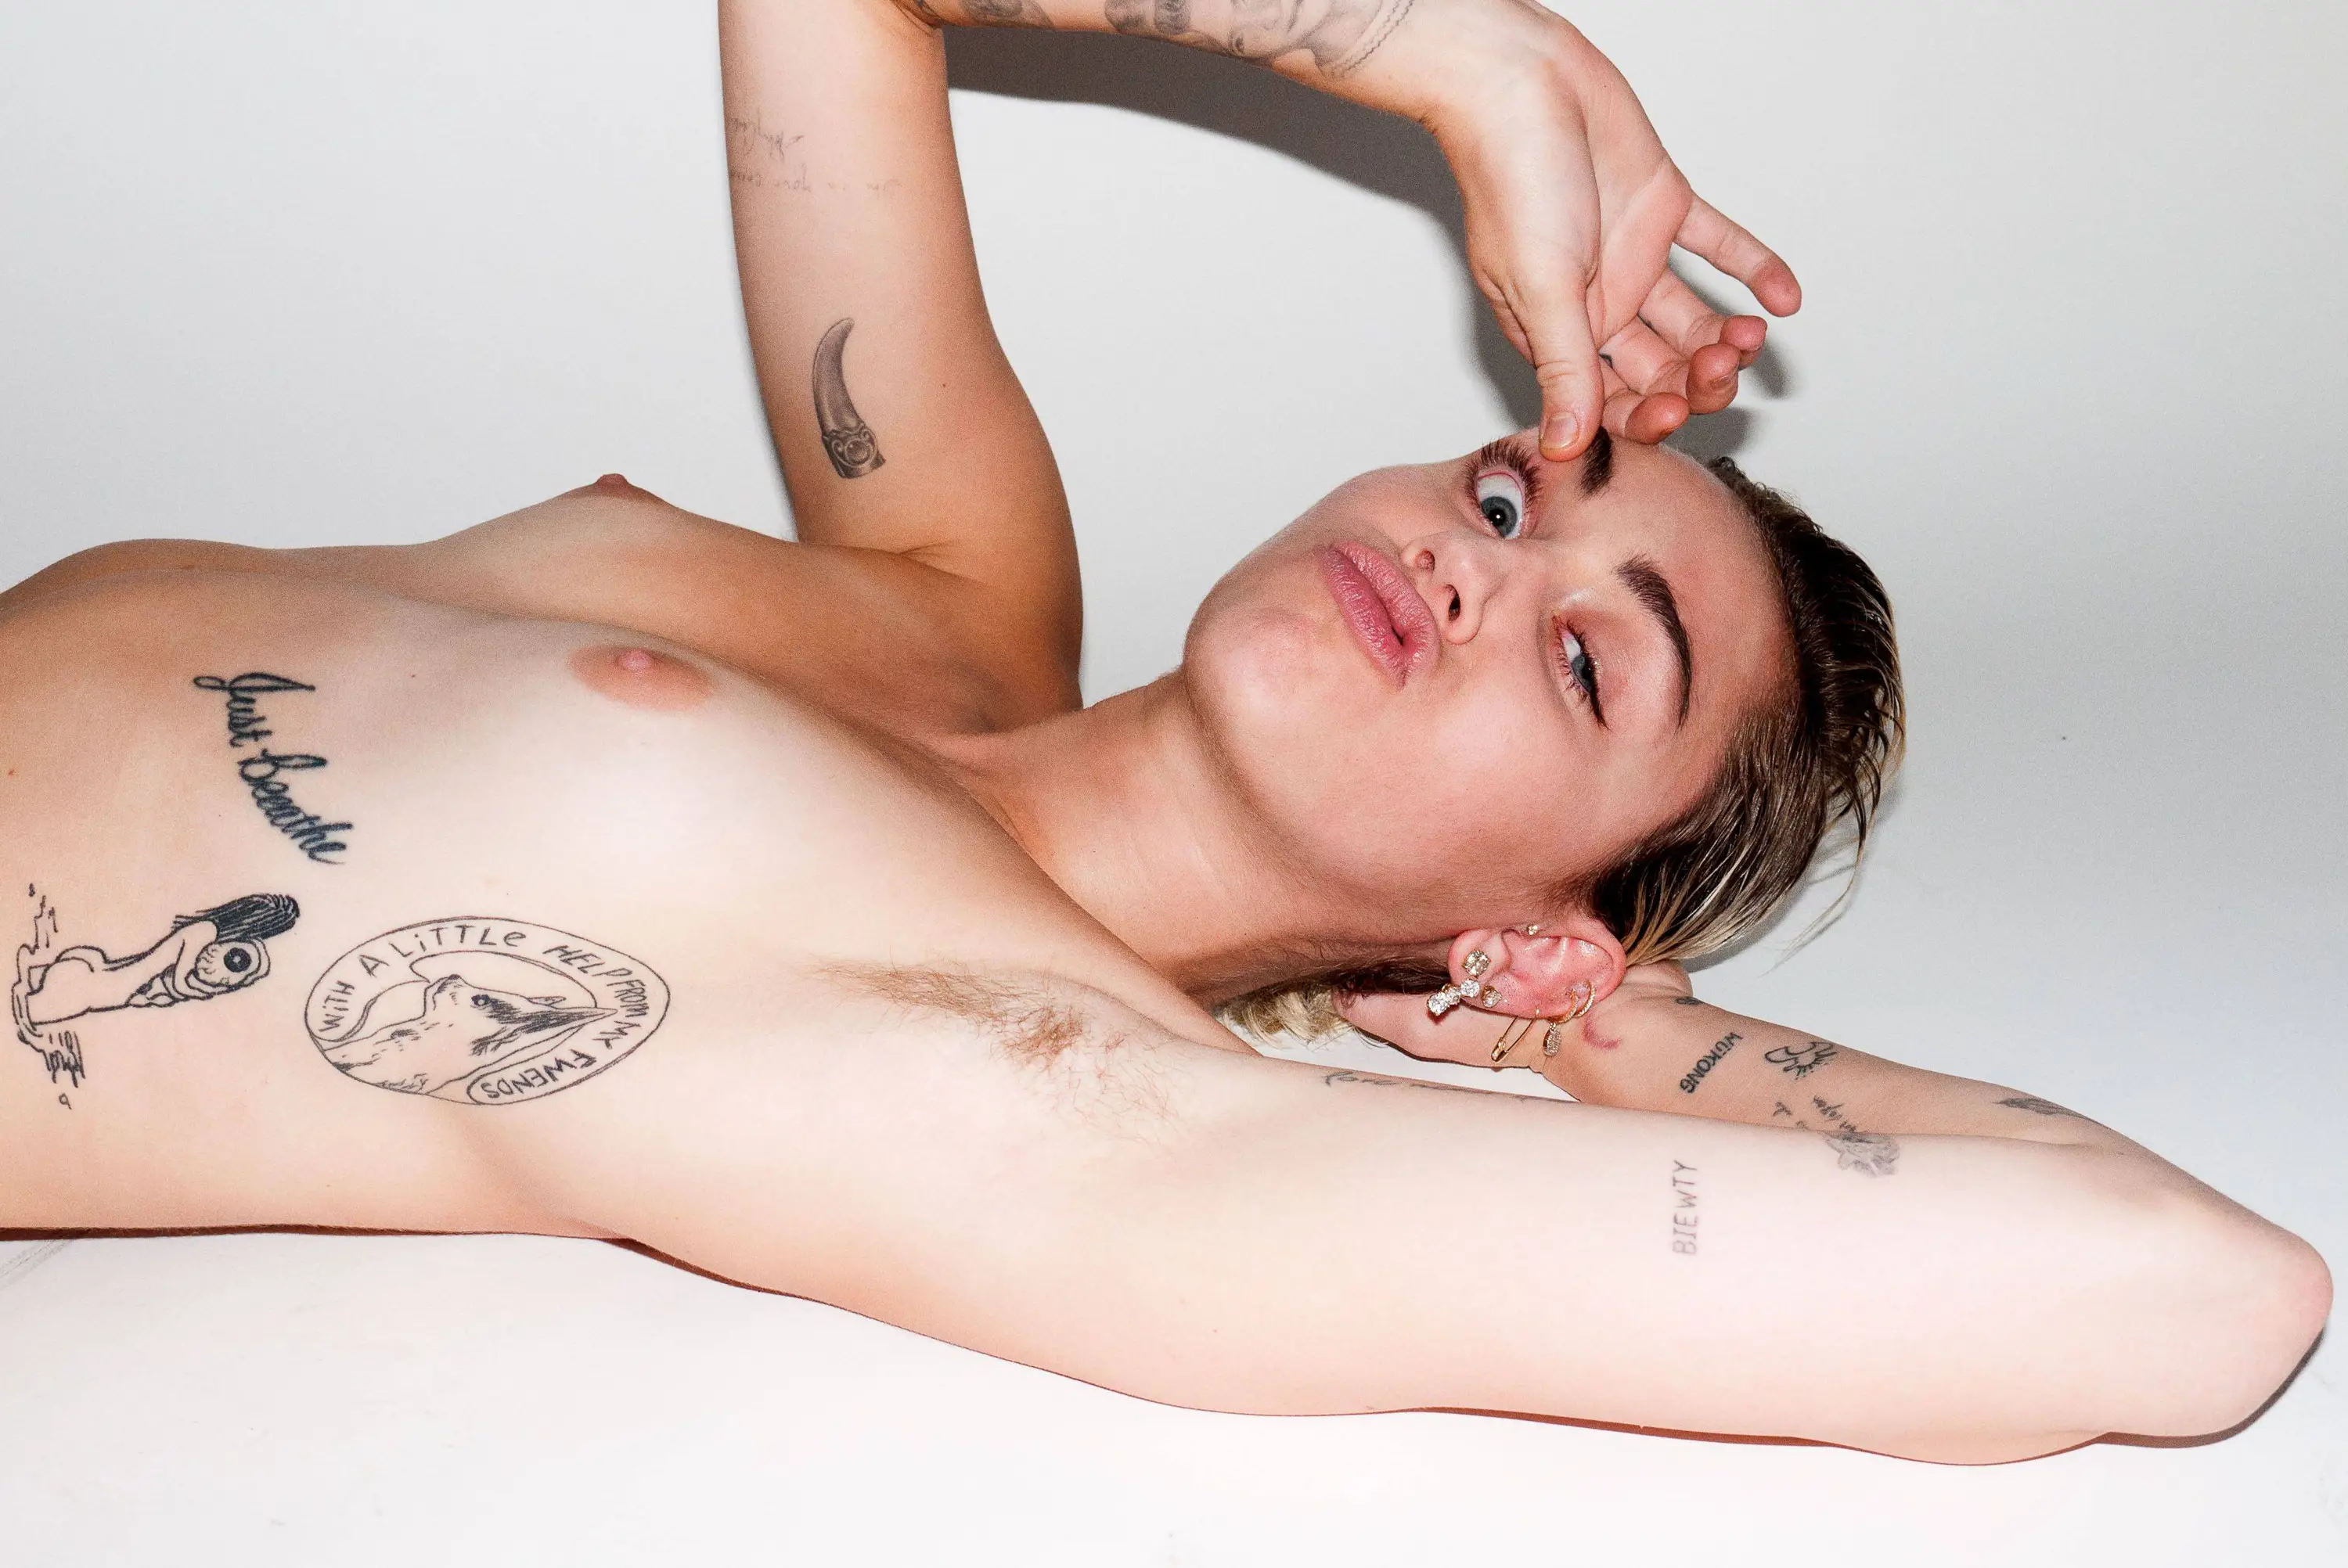 Miley Cyrus by Terry Richardson for CANDY Magazine #9.